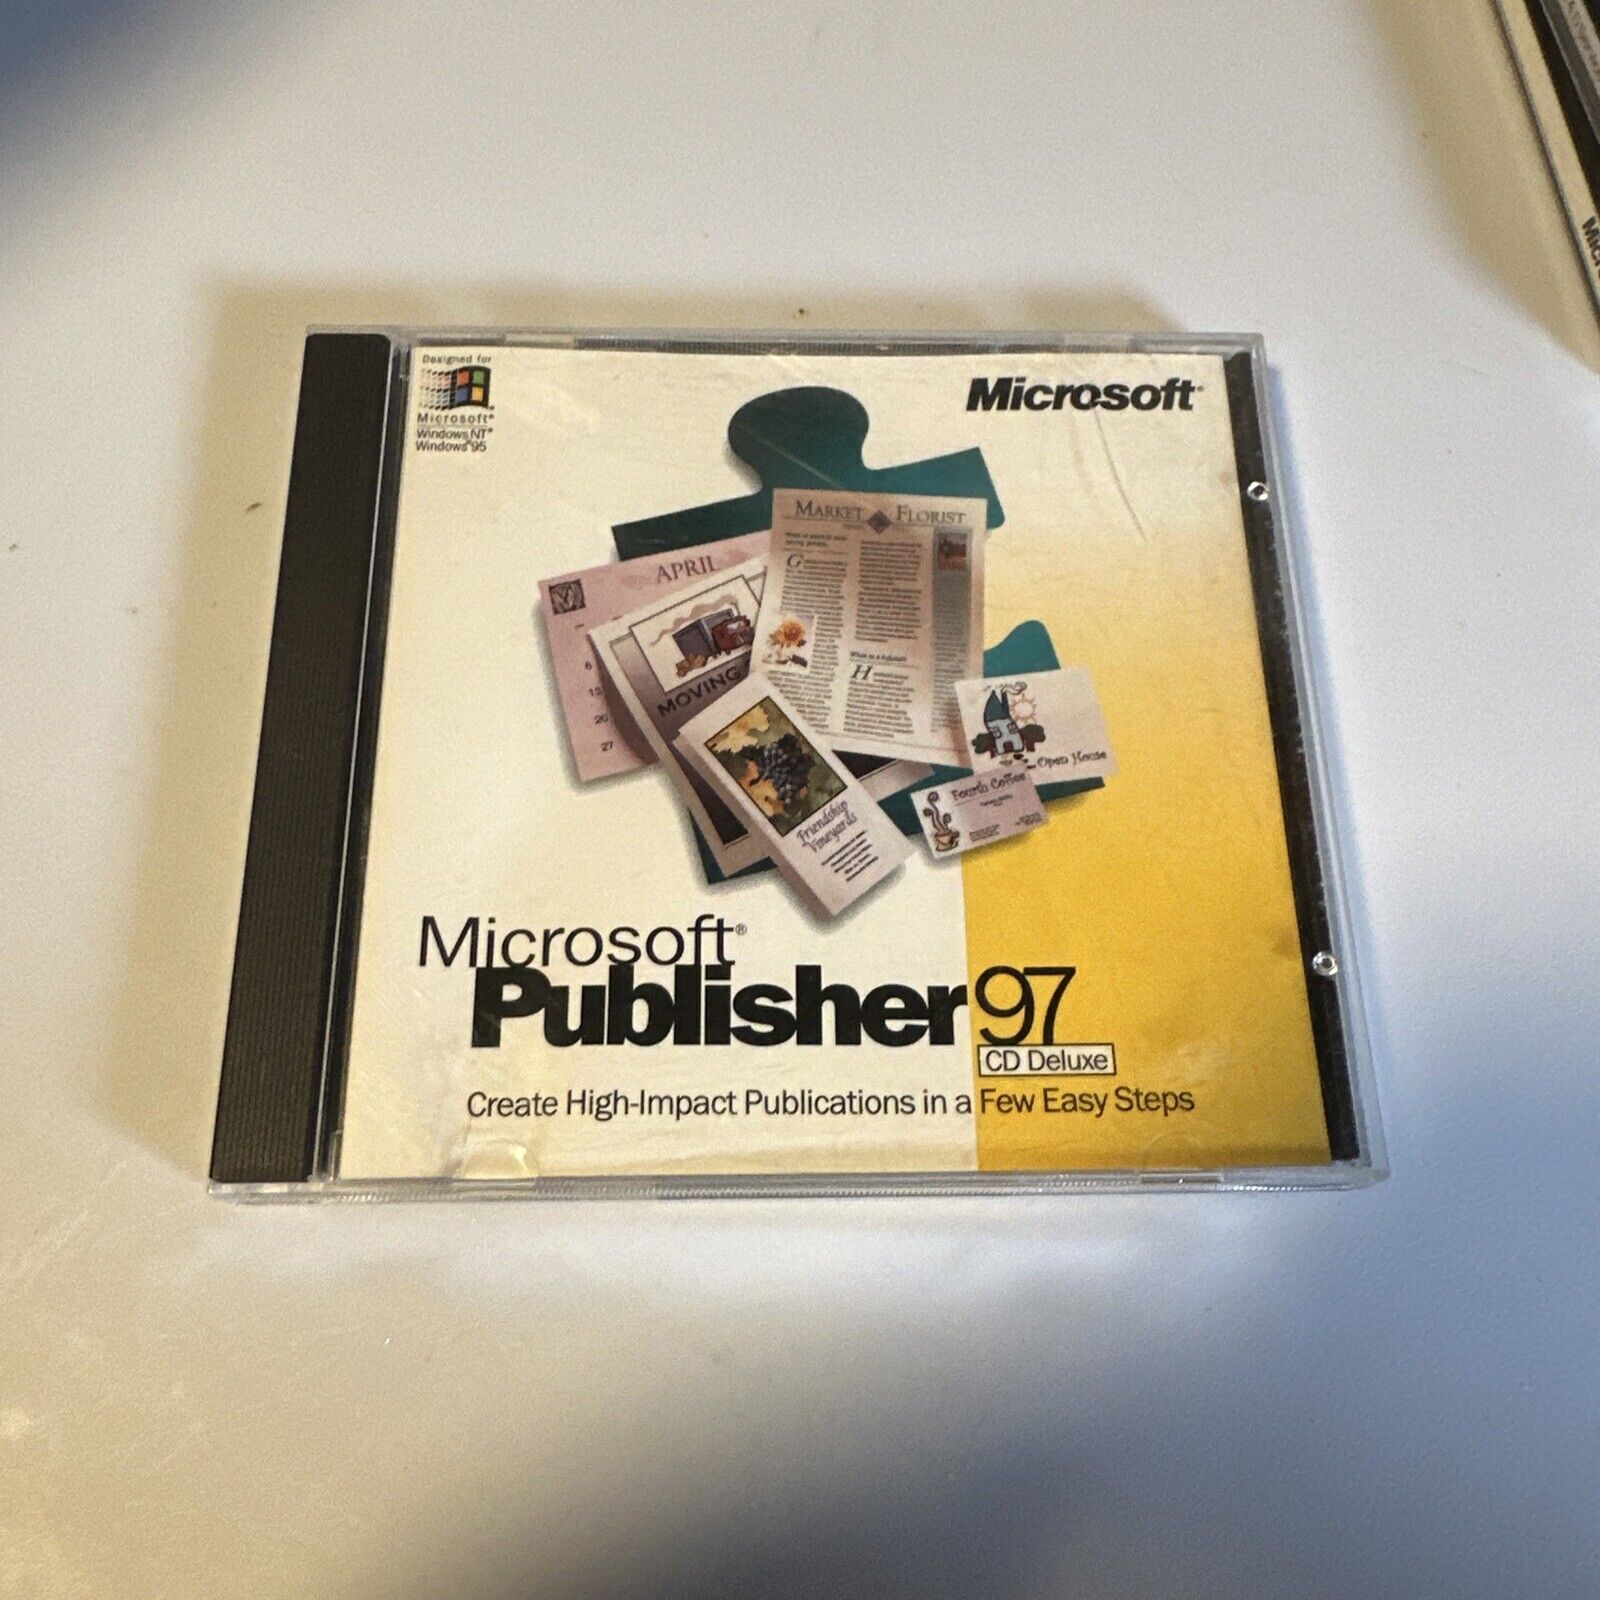 Microsoft Publisher 97 PC Software CD Deluxe Version Create Publications w/ Key